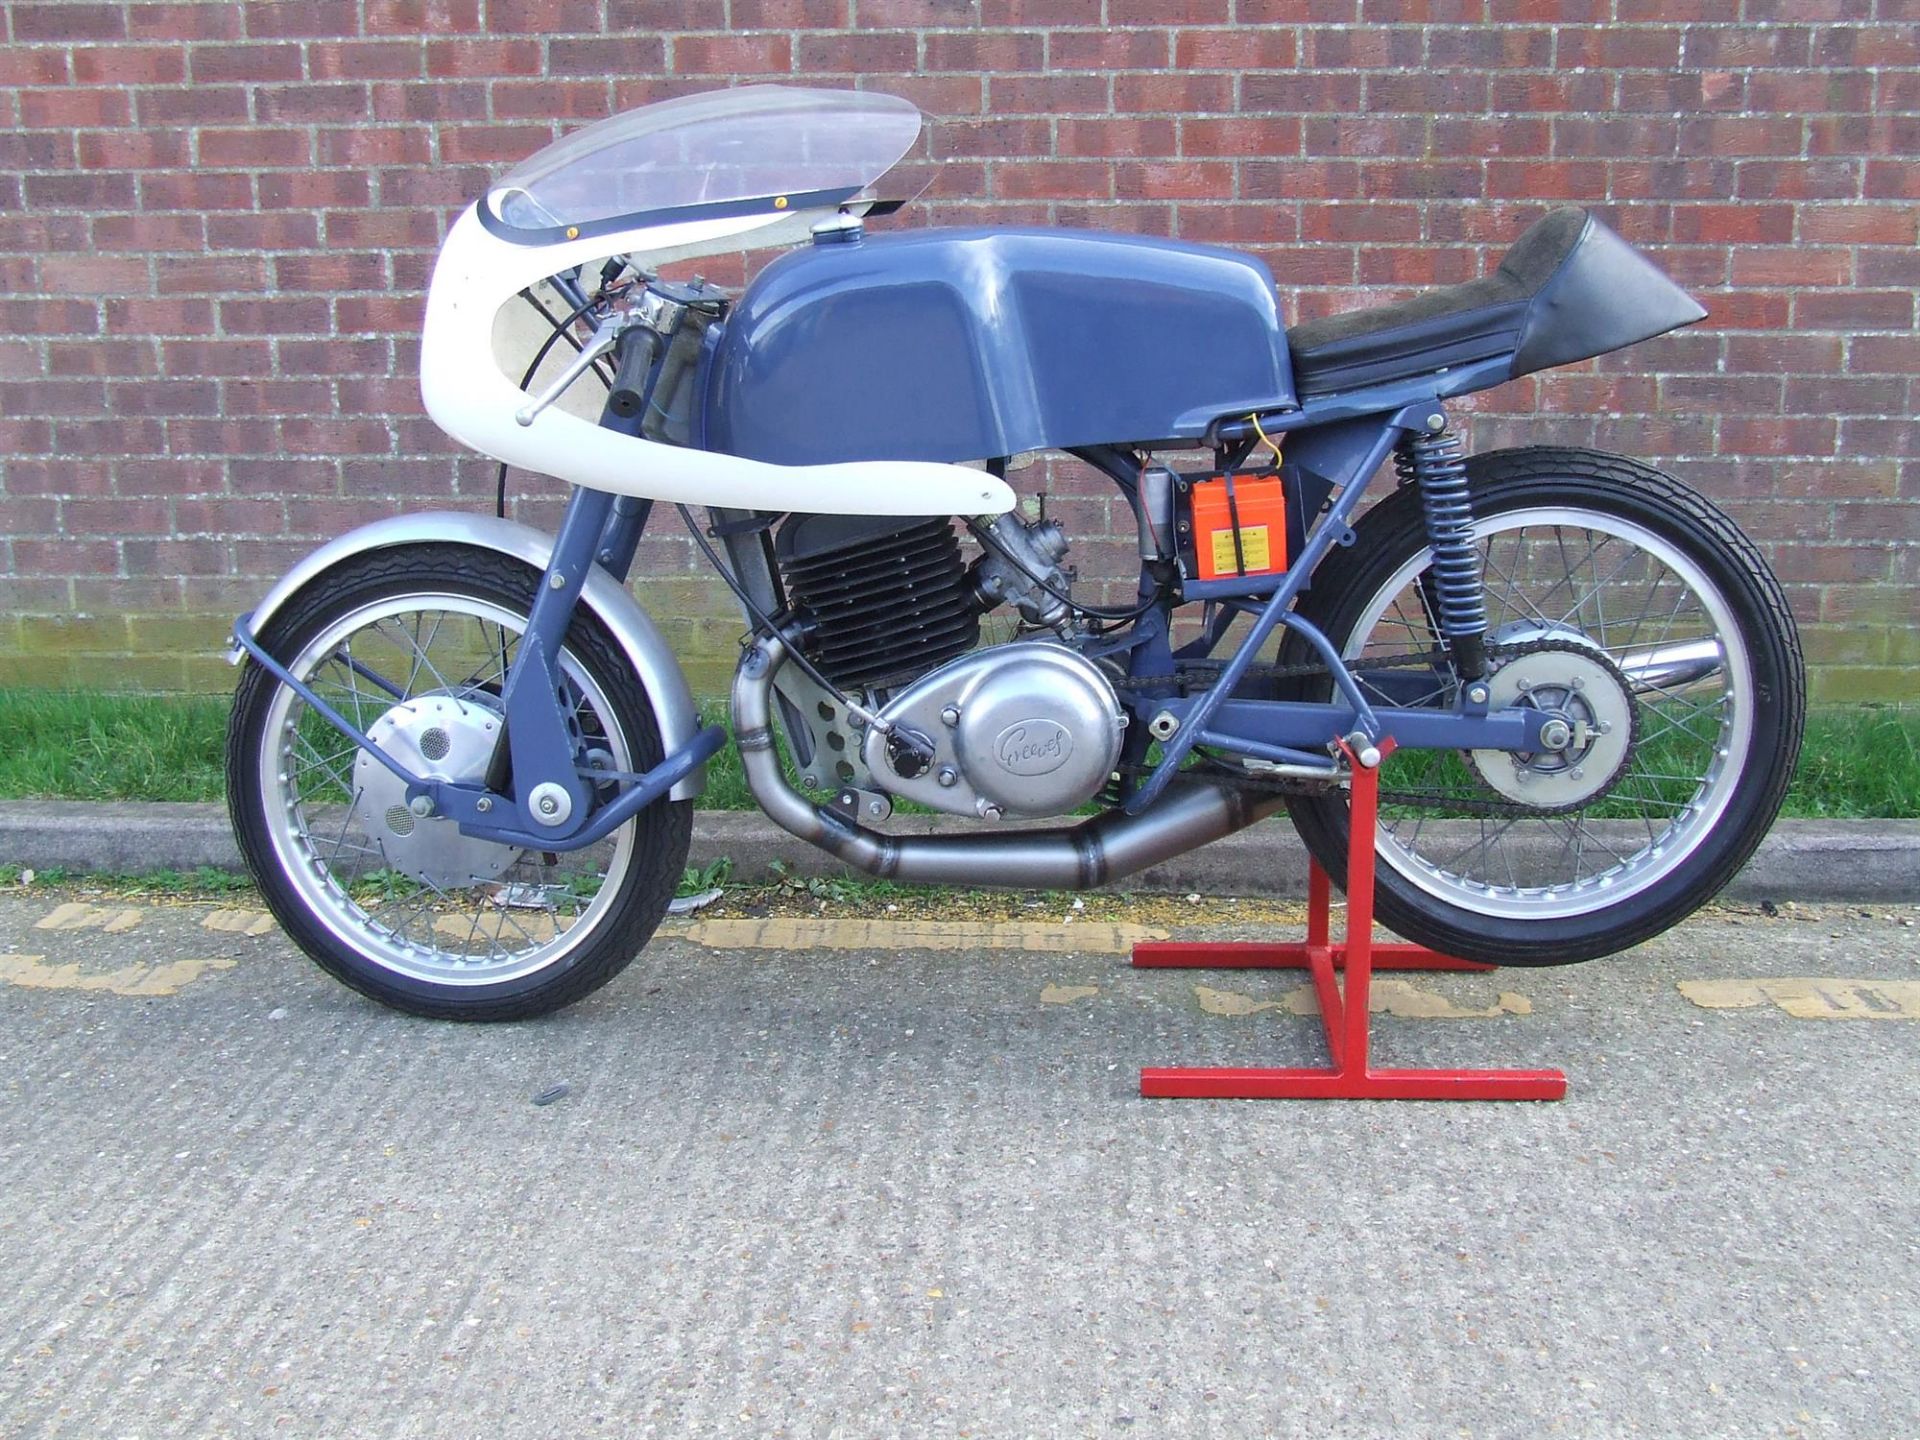 1964 Greeves Silverstone 249cc - Image 2 of 10